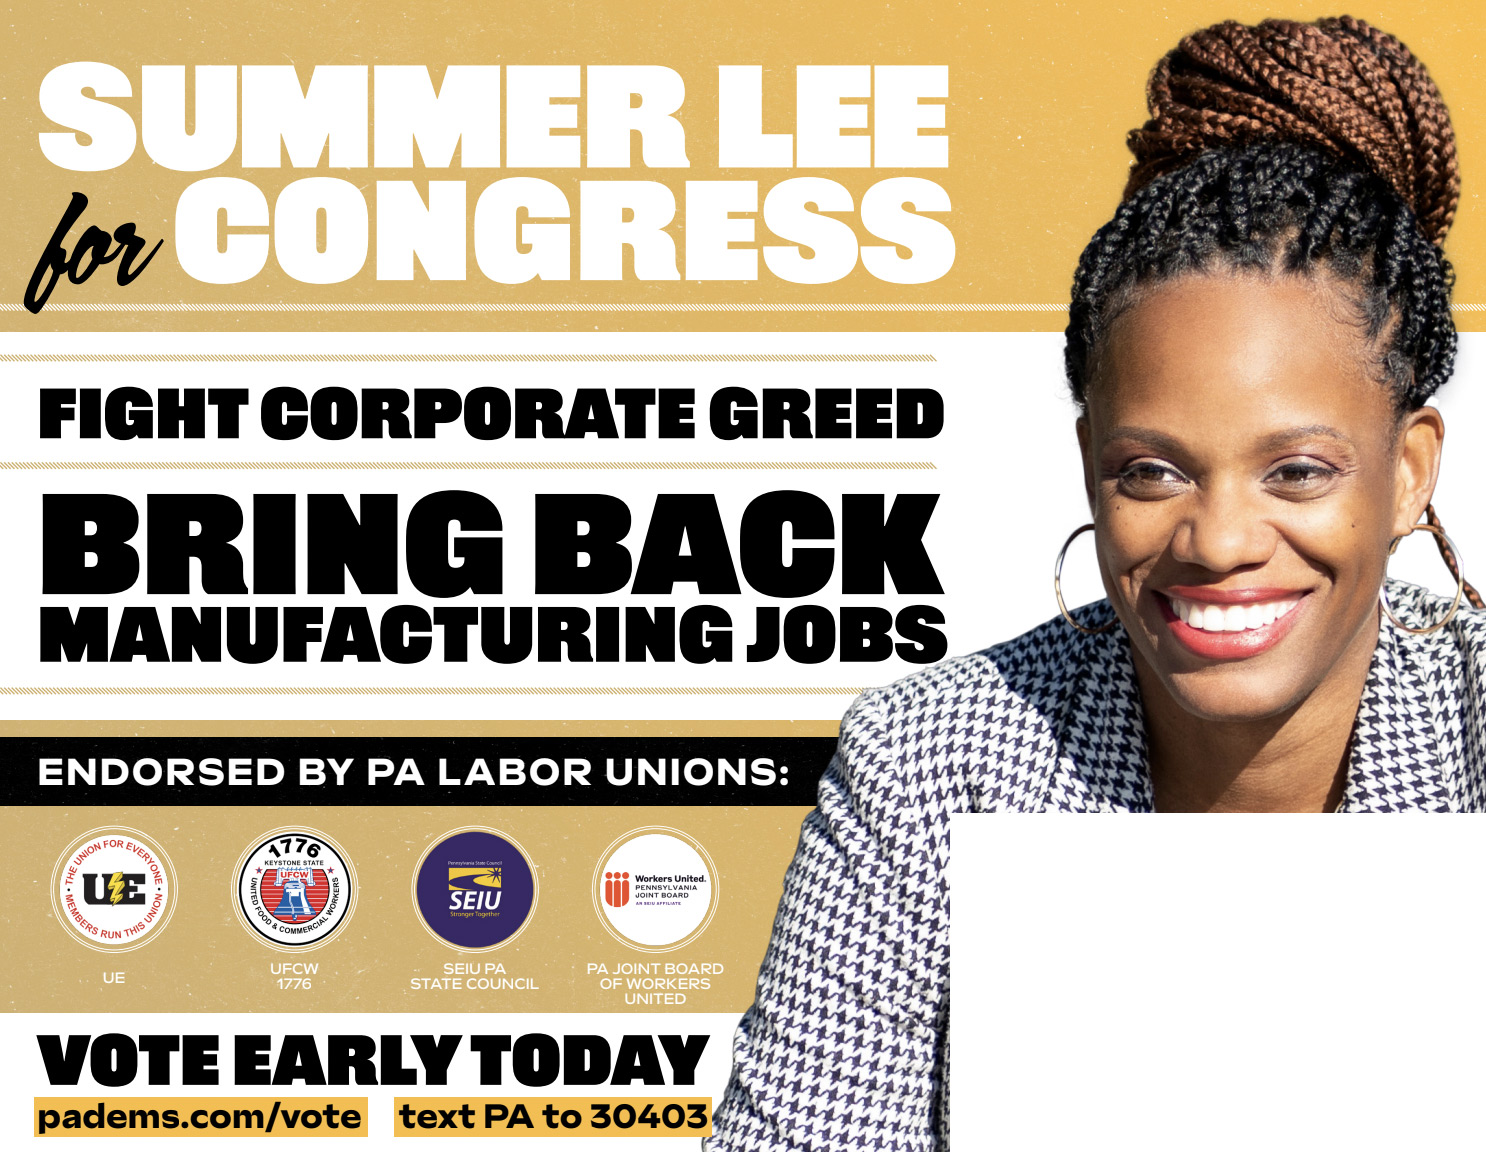 Why PA-12 Needs Summer Lee in Congress - Working Families Party